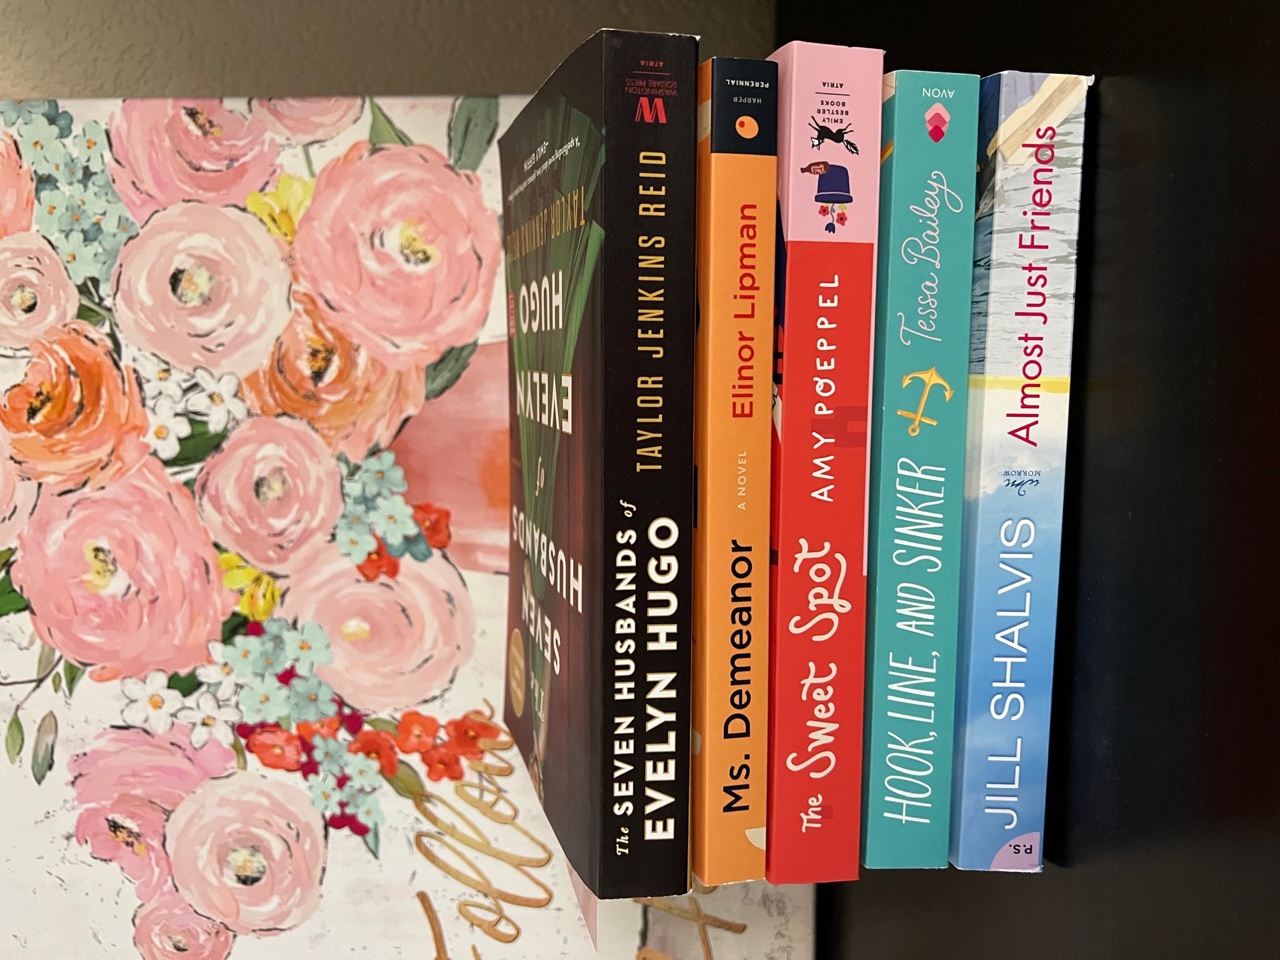 On a dark brown nightstand, five paperback books are stacked one on top of the other. Behind them is artwork of painted pink flowers in a pink vase.